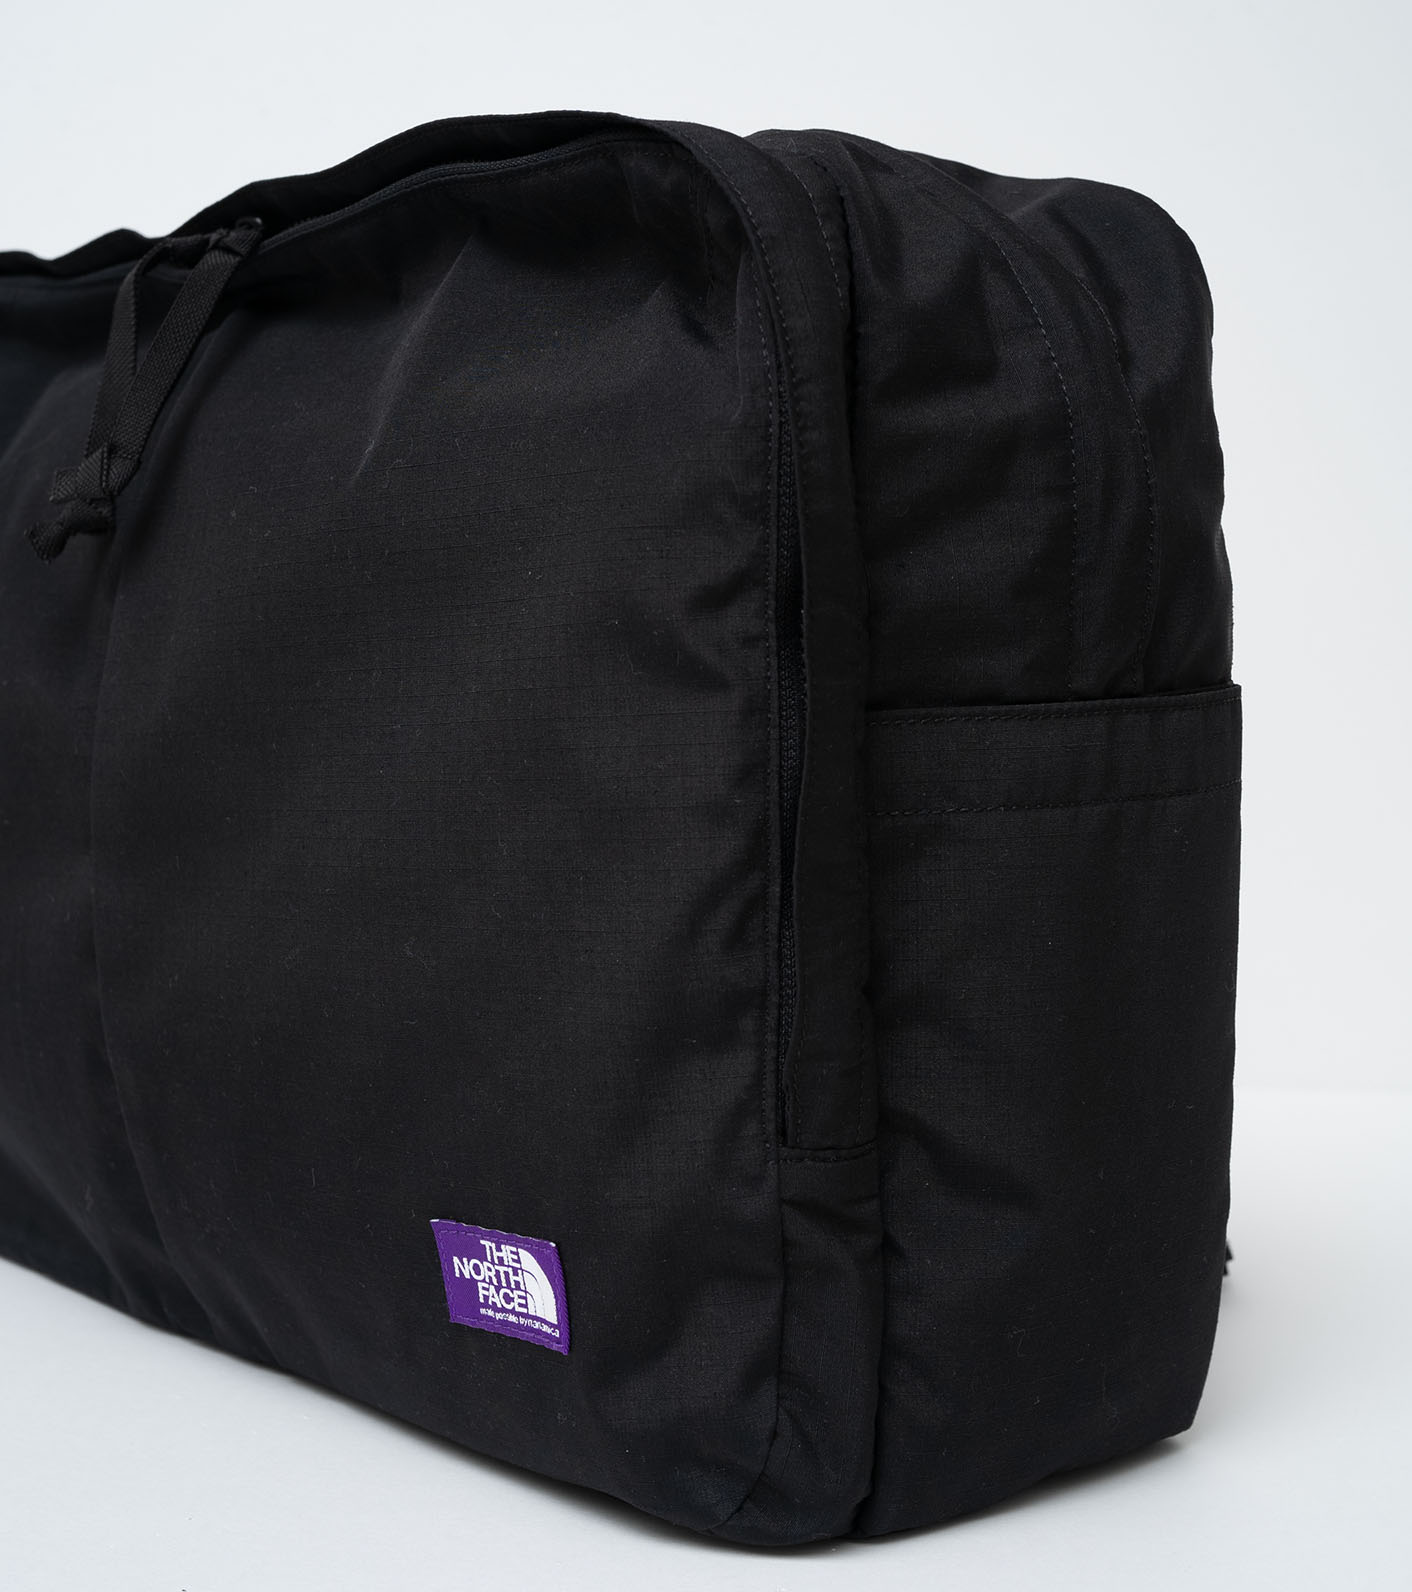 THE NORTH FACE PURPLE LABEL 3way bag S - リュック/バックパック